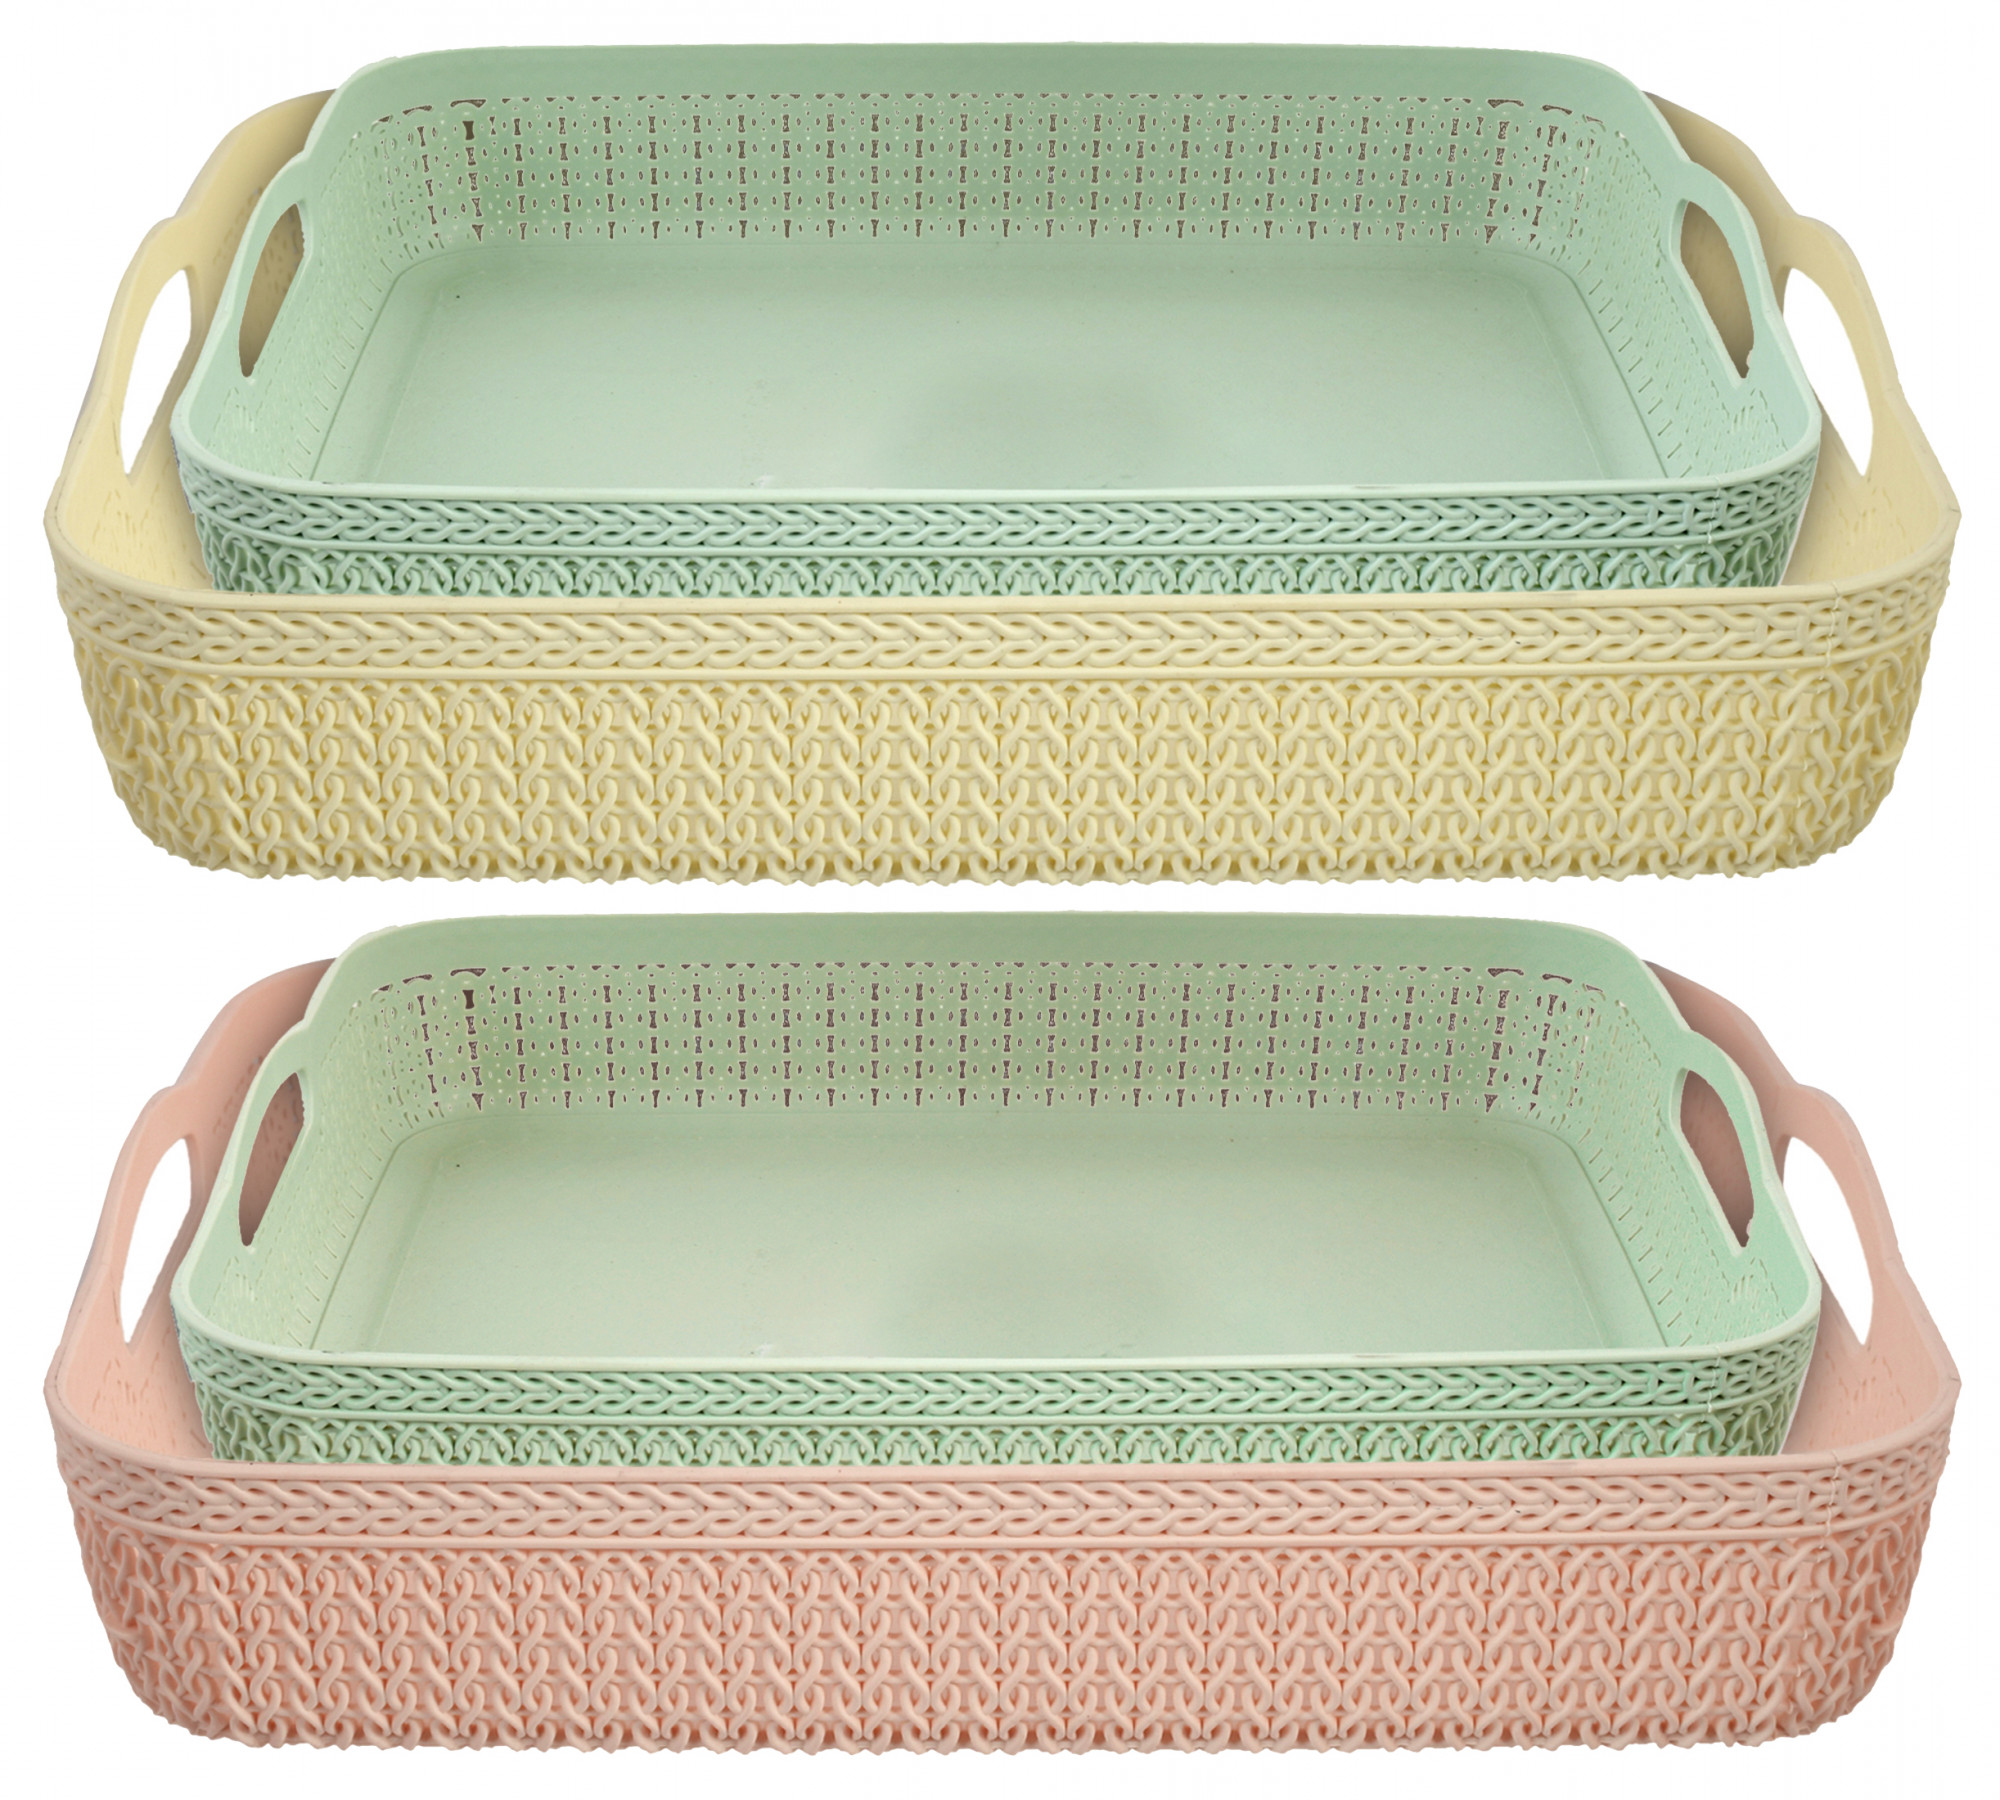 Kuber Industries Q-3,4 Unbreakable 4 Pieces Plastic Multipurpose Small & Large Size Flexible Storage Baskets/Fruit Vegetable Bathroom Stationary Home Basket with Handles,Multi